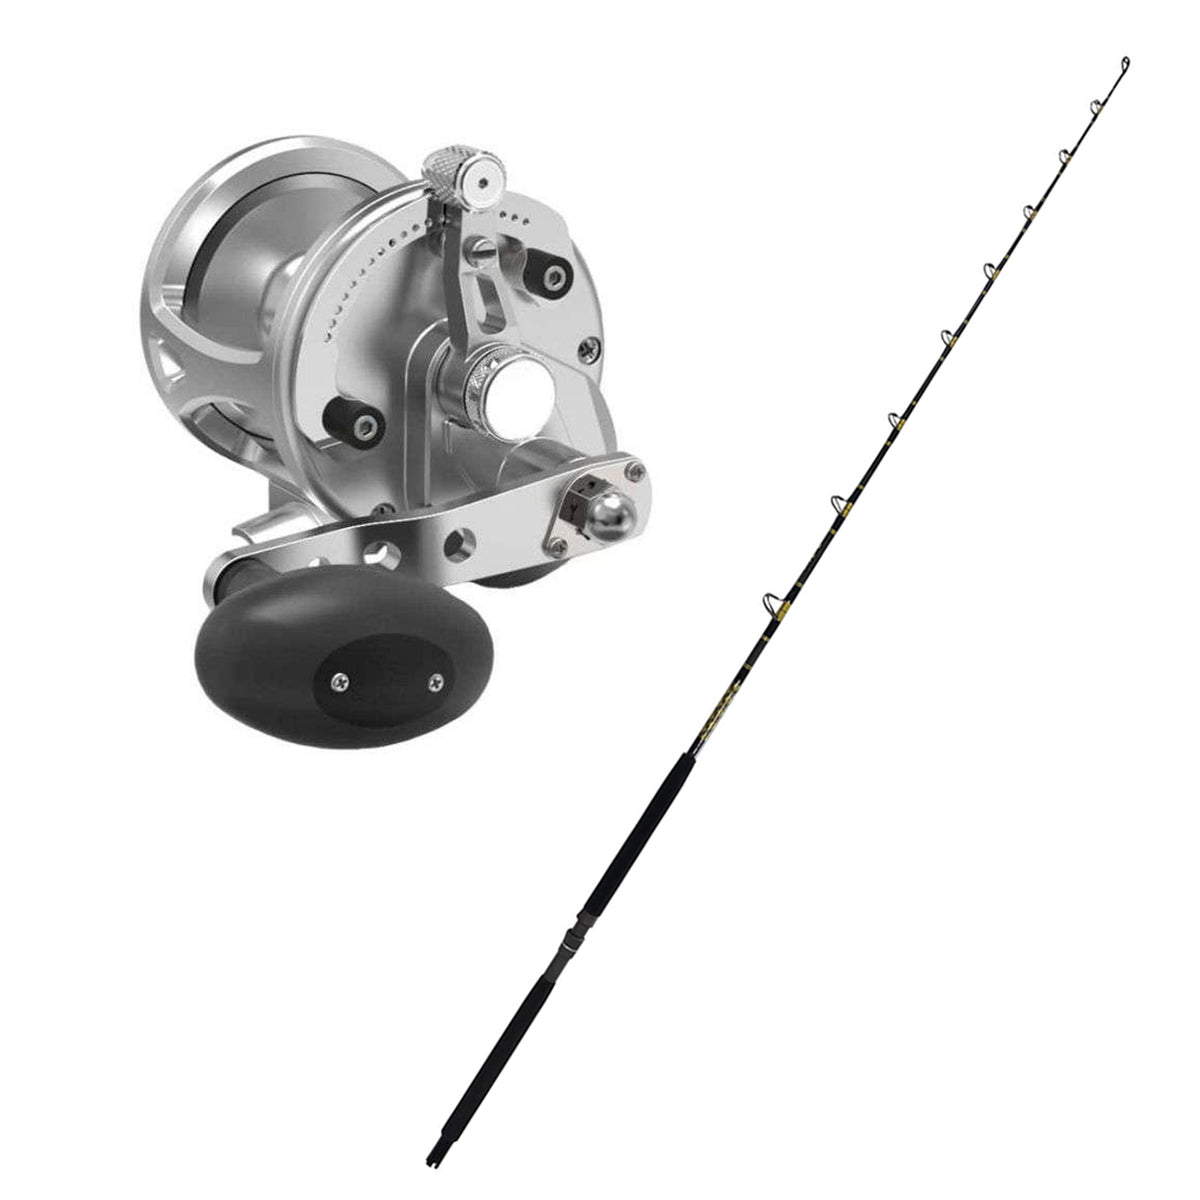 CHAOS KC 15-30 Rod with AVET LX 6/3 G2 Lever Drag Casting Reel Combo